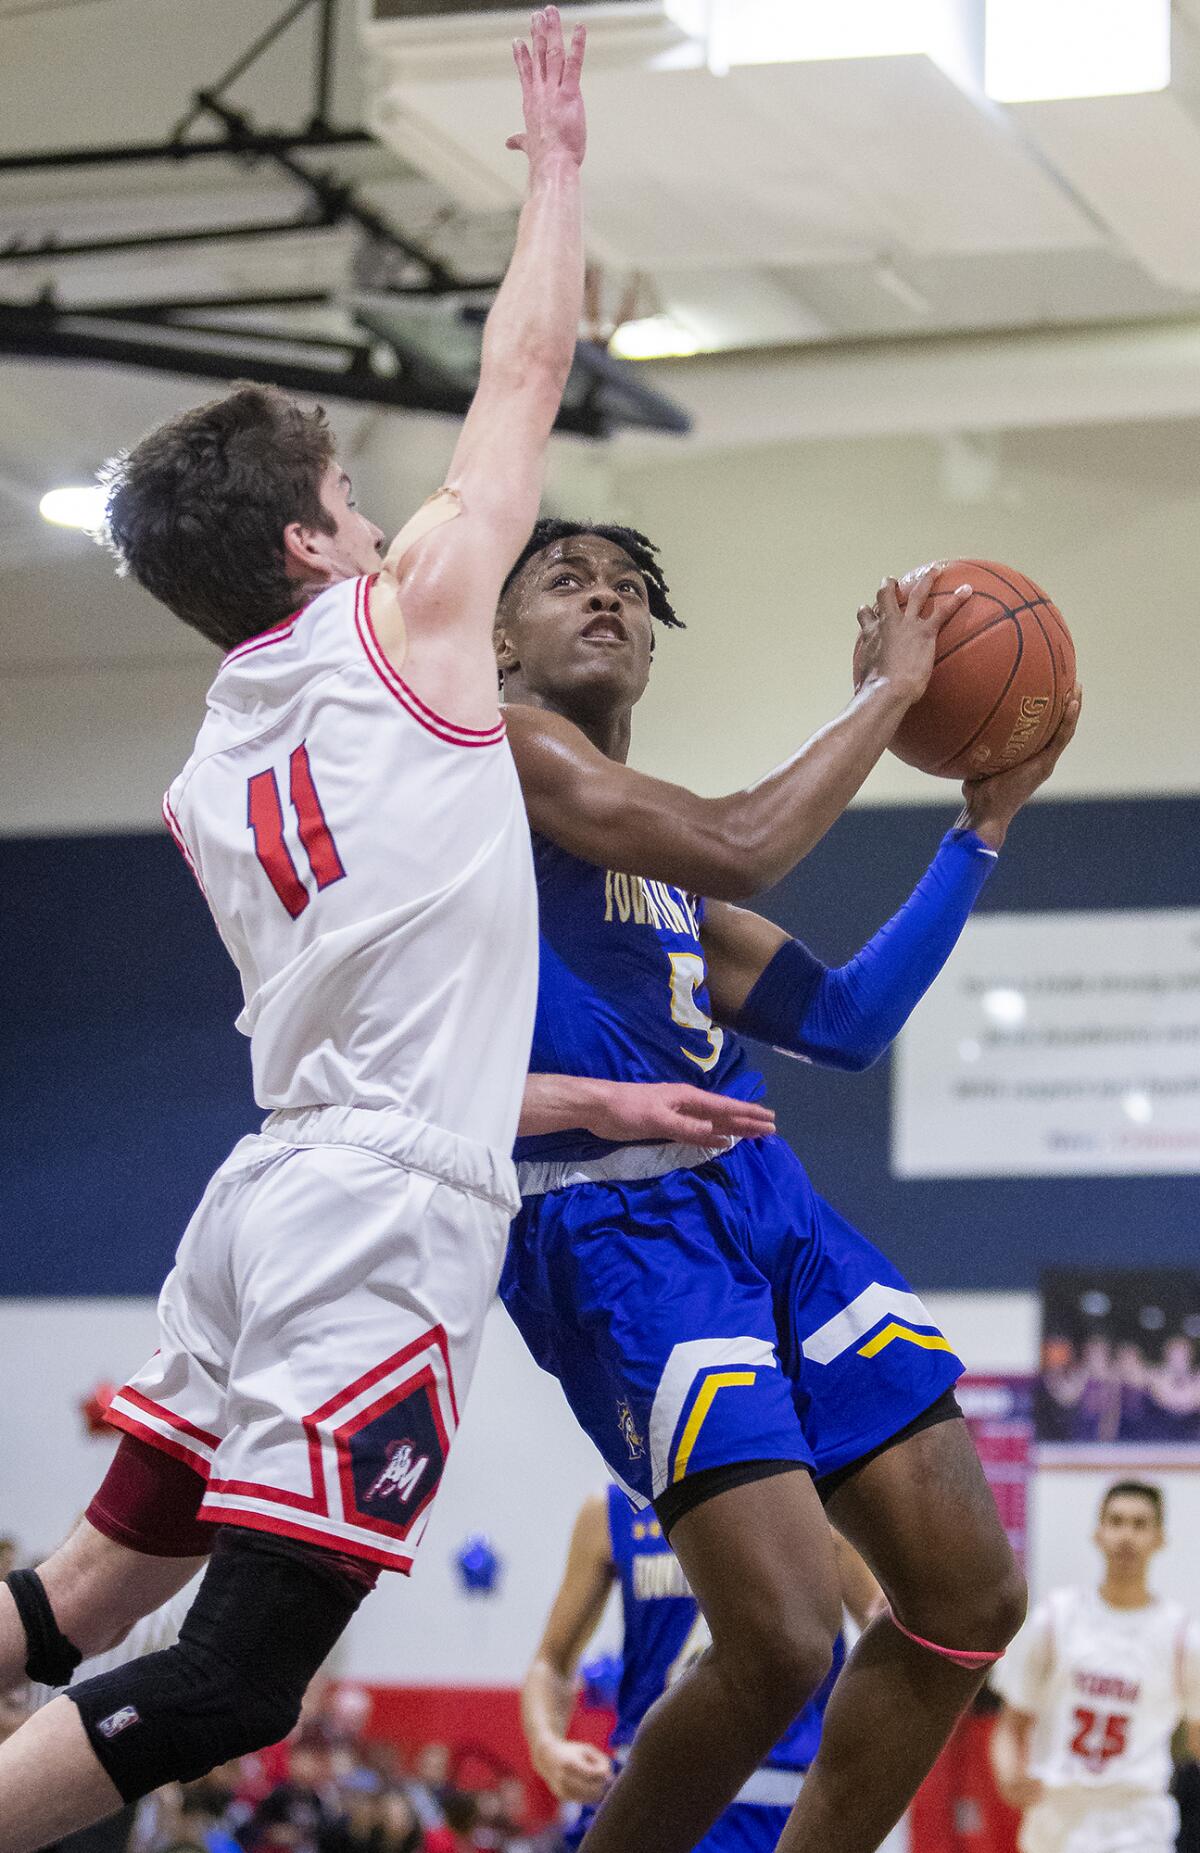 Fountain Valley's Jeremiah Davis, shown going for a shot in a Feb. 18 game against Yorba Linda, led the Barons past Gardena 66-63 in a CIF State Southern California Regional Division III playoff opener on Tuesday.